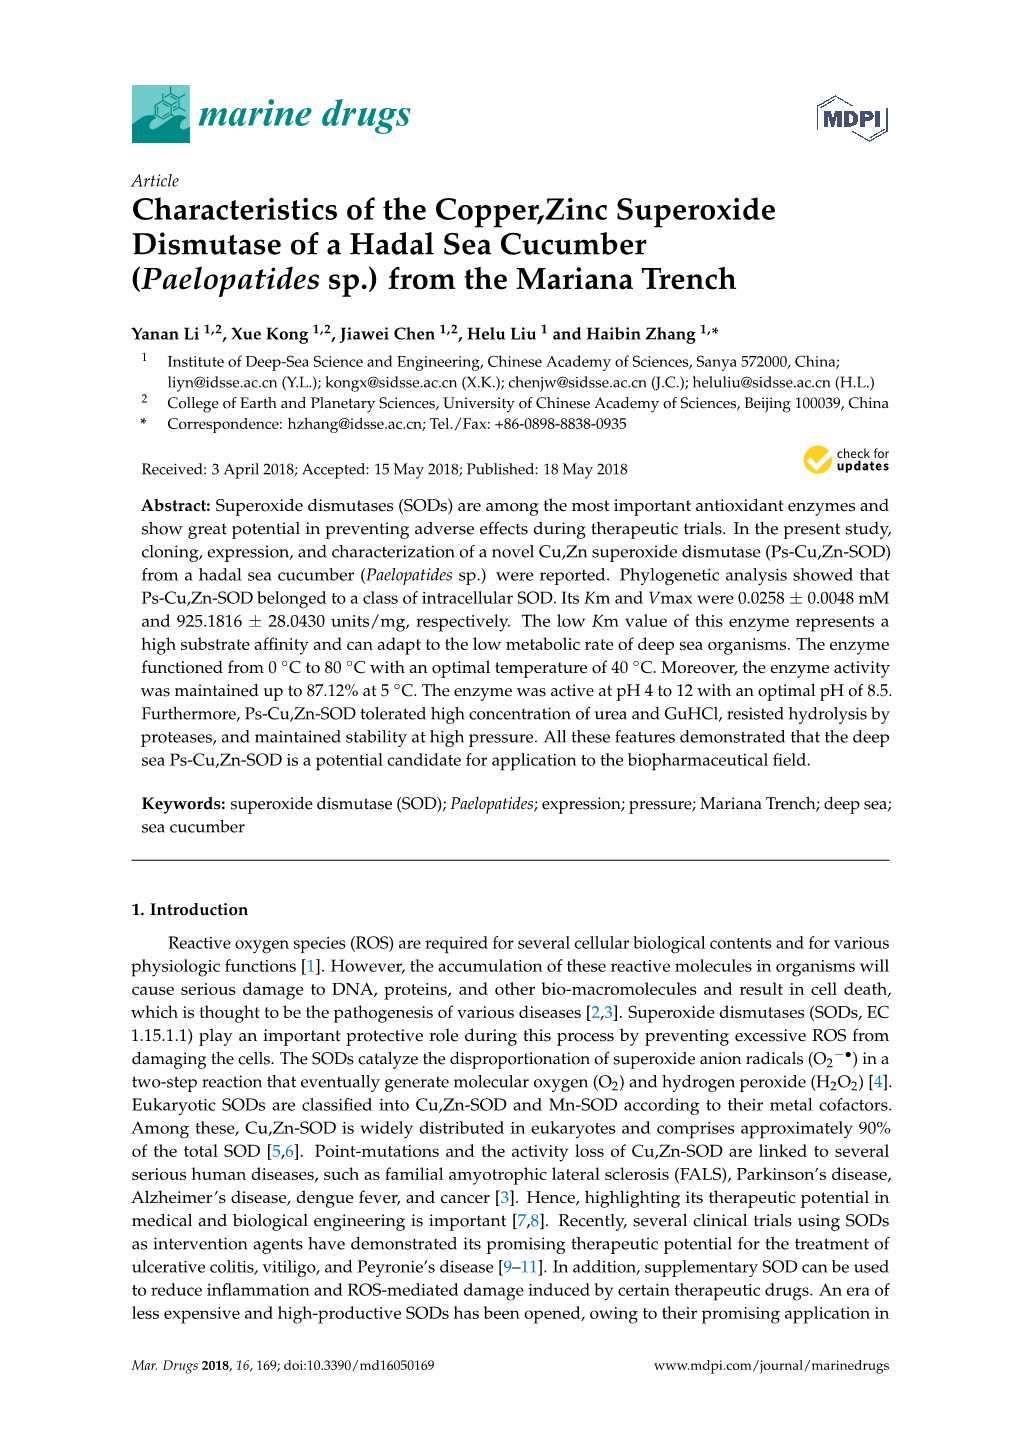 Characteristics of the Copper,Zinc Superoxide Dismutase of a Hadal Sea Cucumber (Paelopatides Sp.) from the Mariana Trench